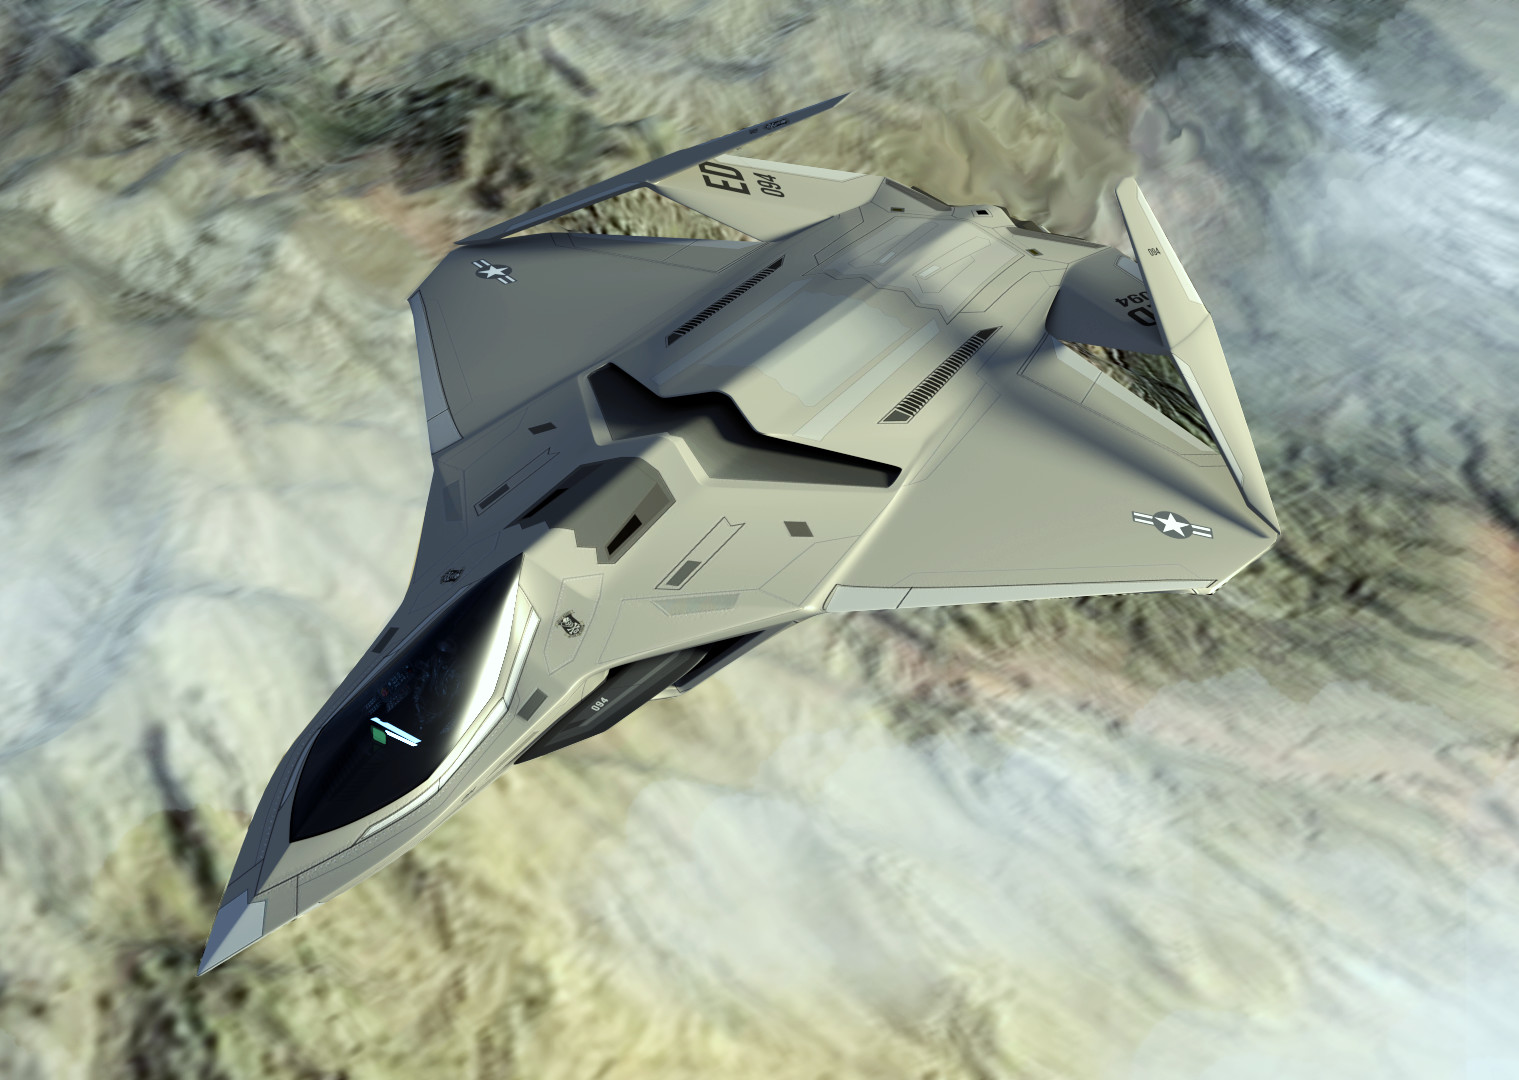 future fighter jets concept art